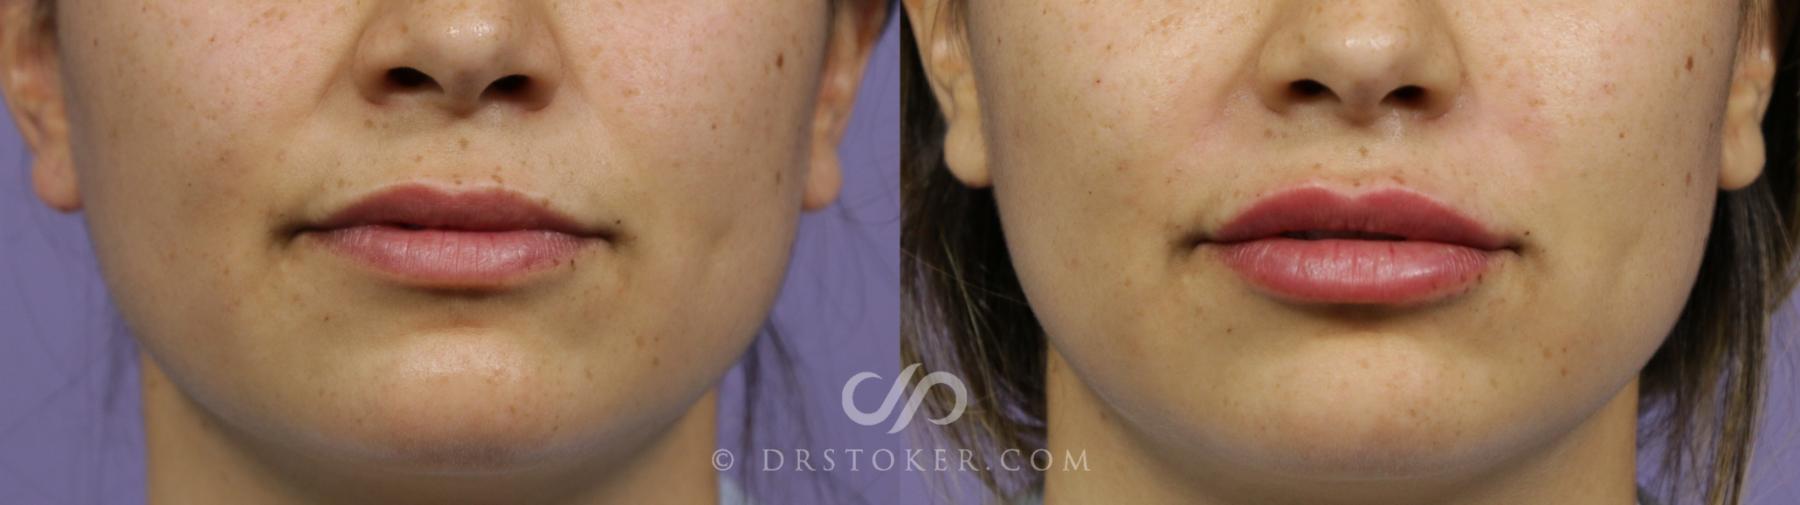 Before & After Lip Fillers/Augmentation Case 1863 Front View in Los Angeles, CA